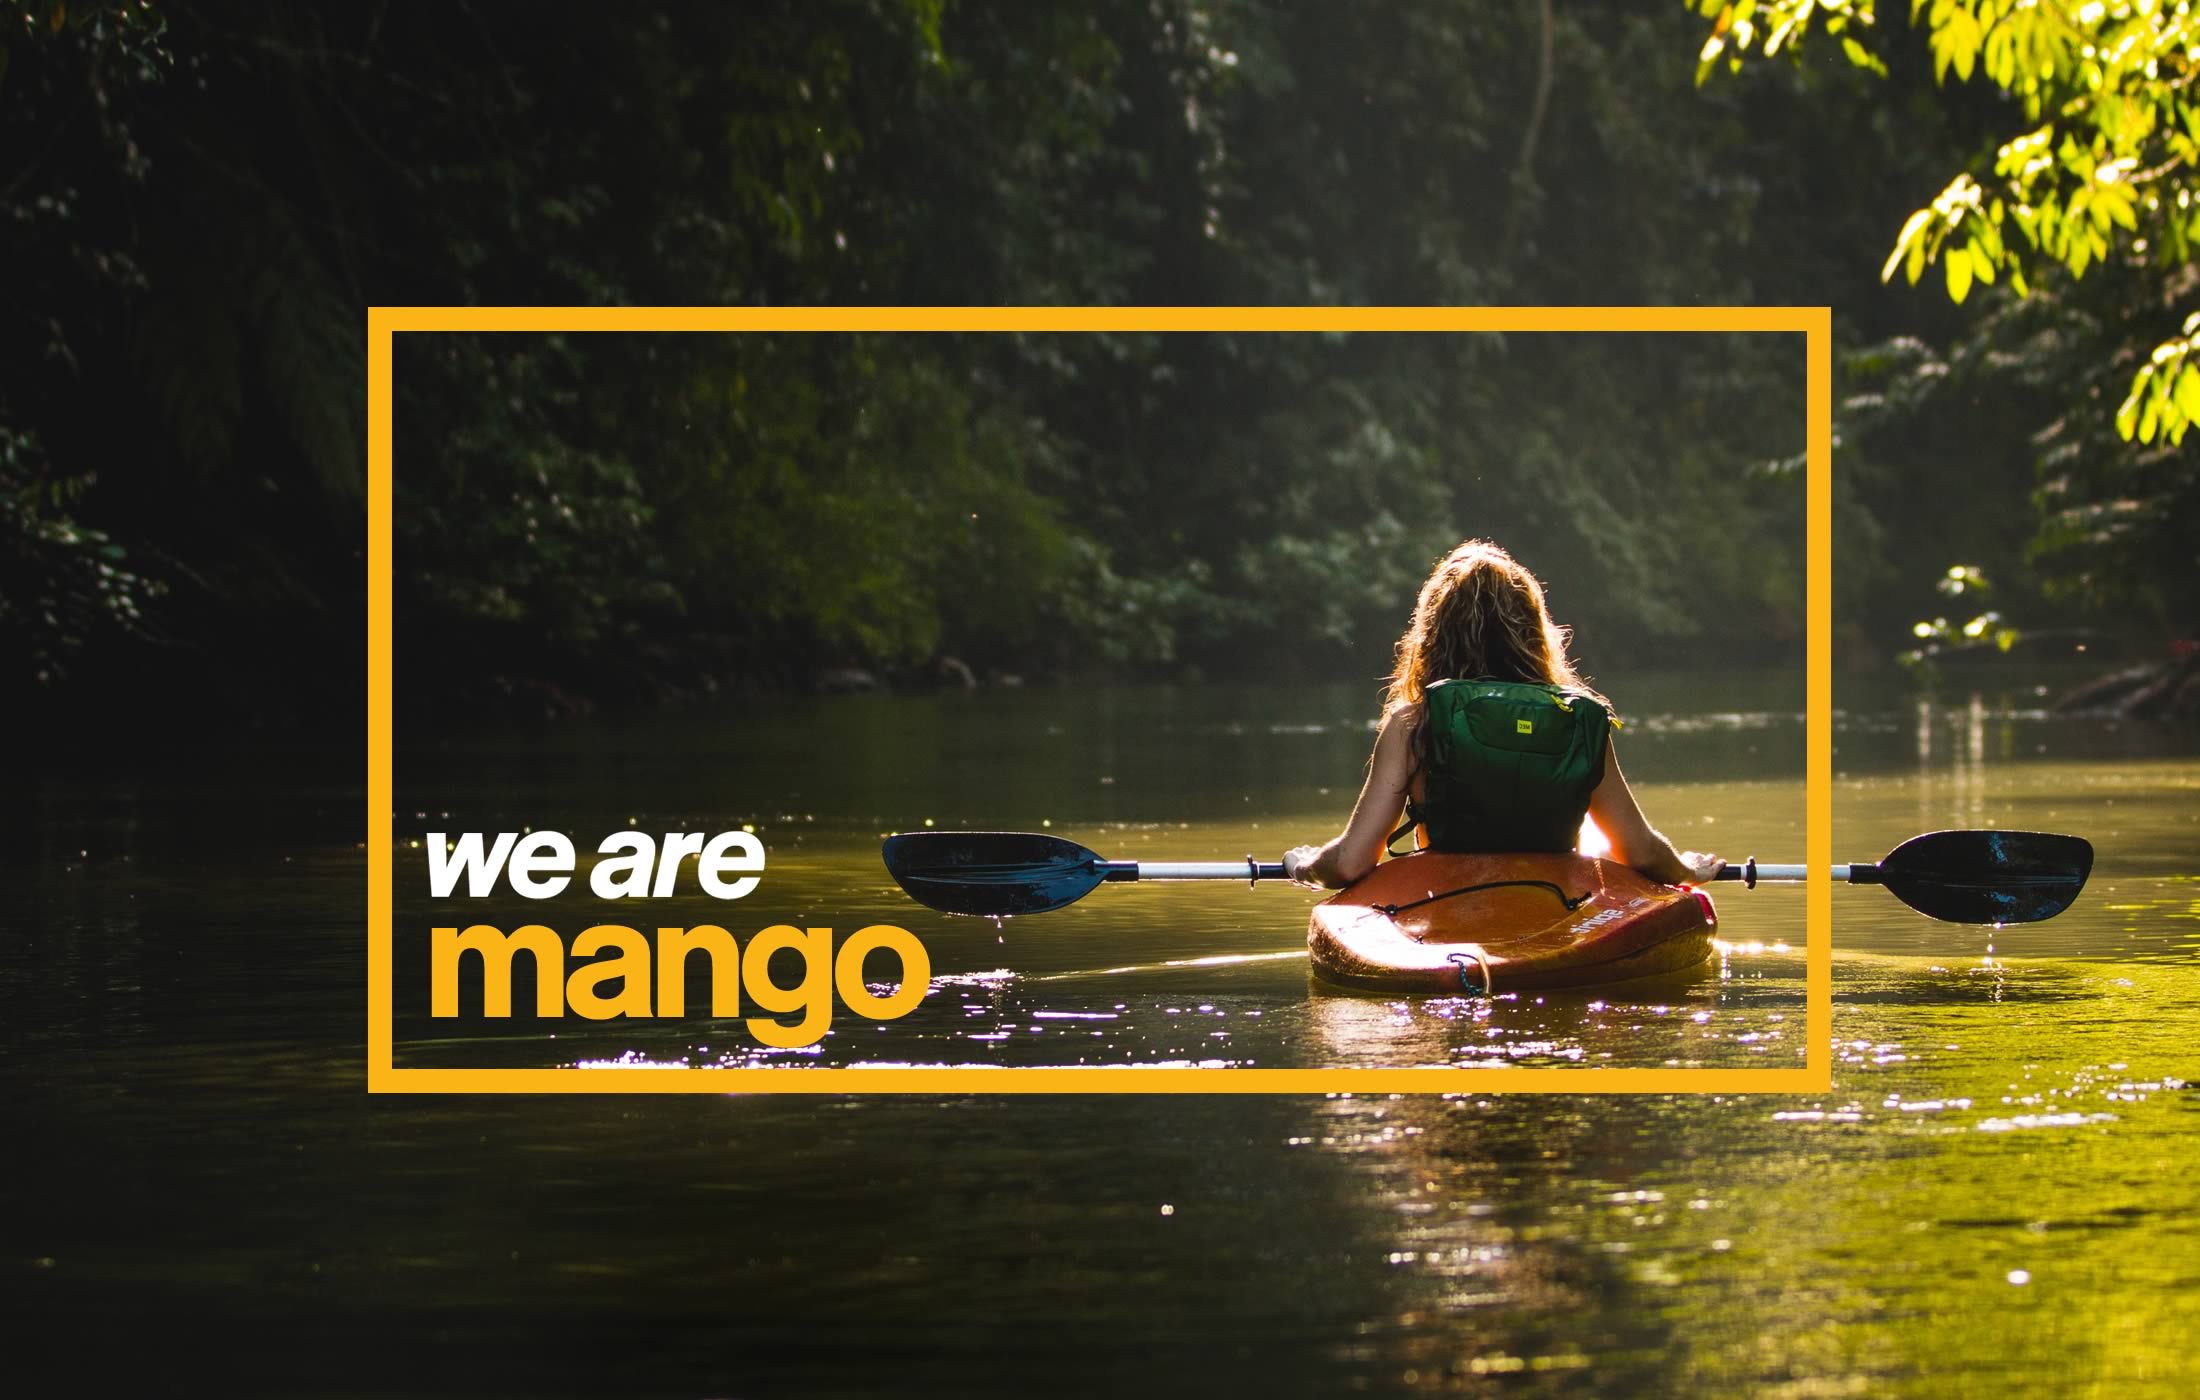 Photograph of a young woman kayaking with 'We are Mango' superimposed